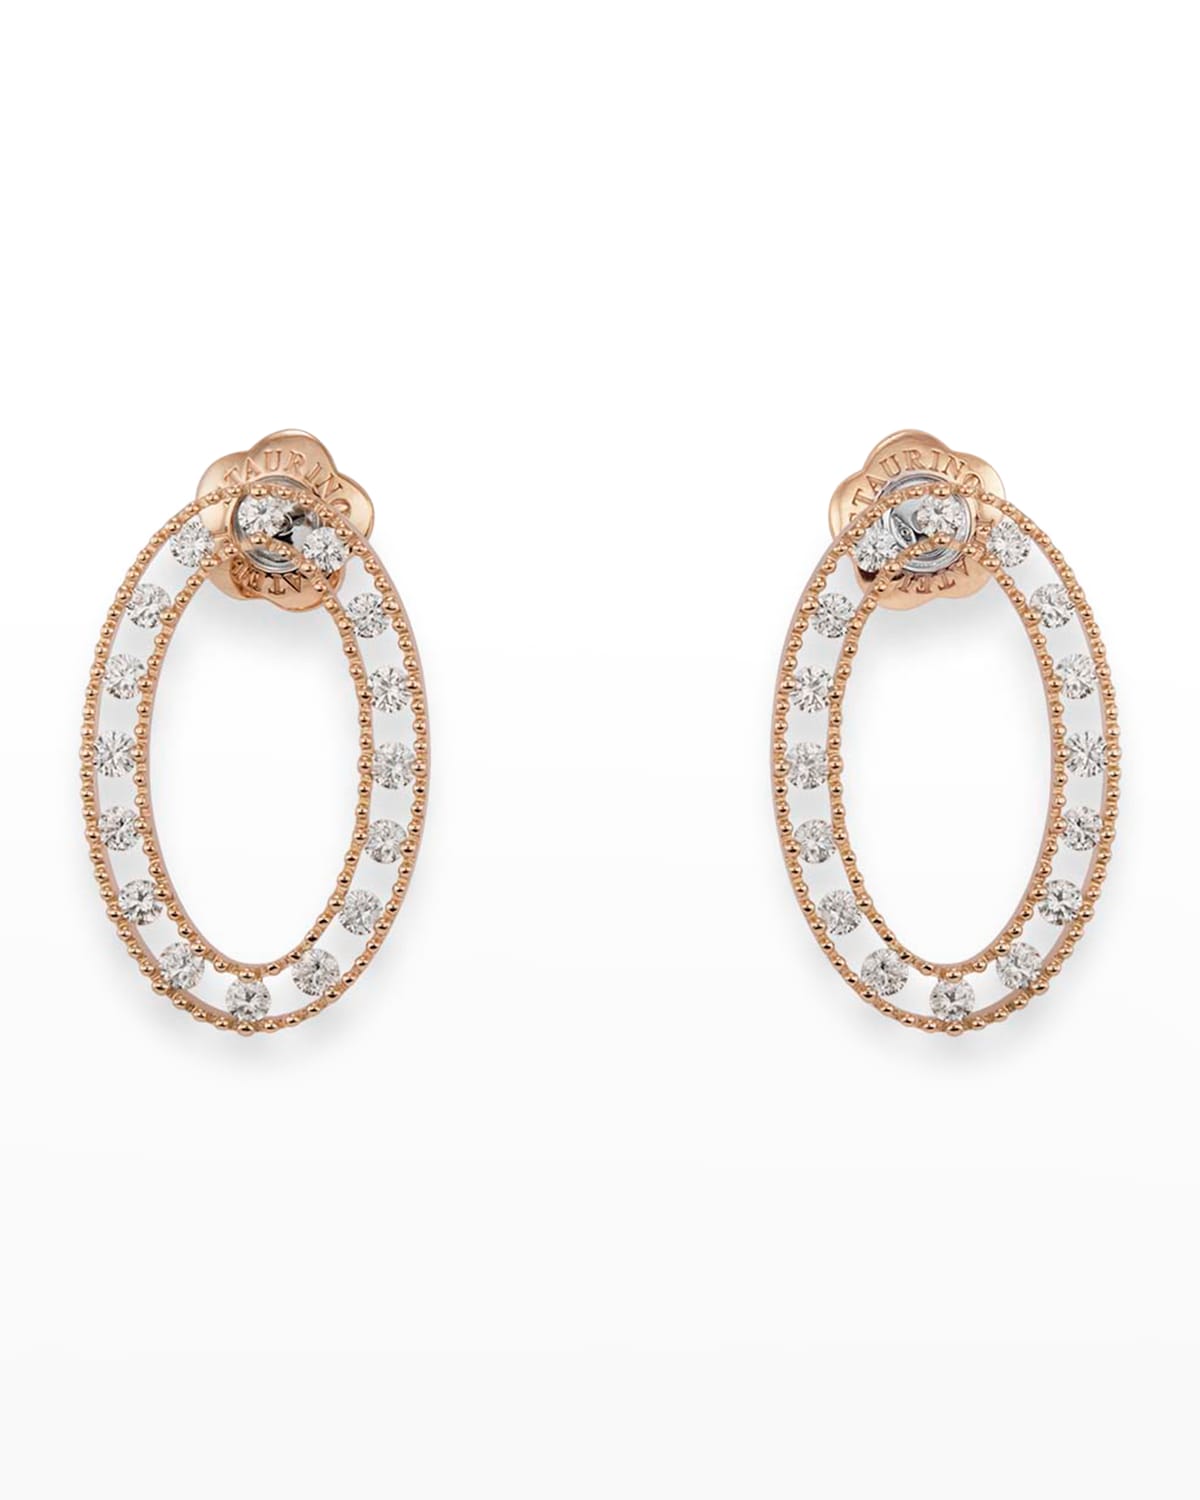 Staurino Rose Gold Allegra Oval Earrings With Diamonds